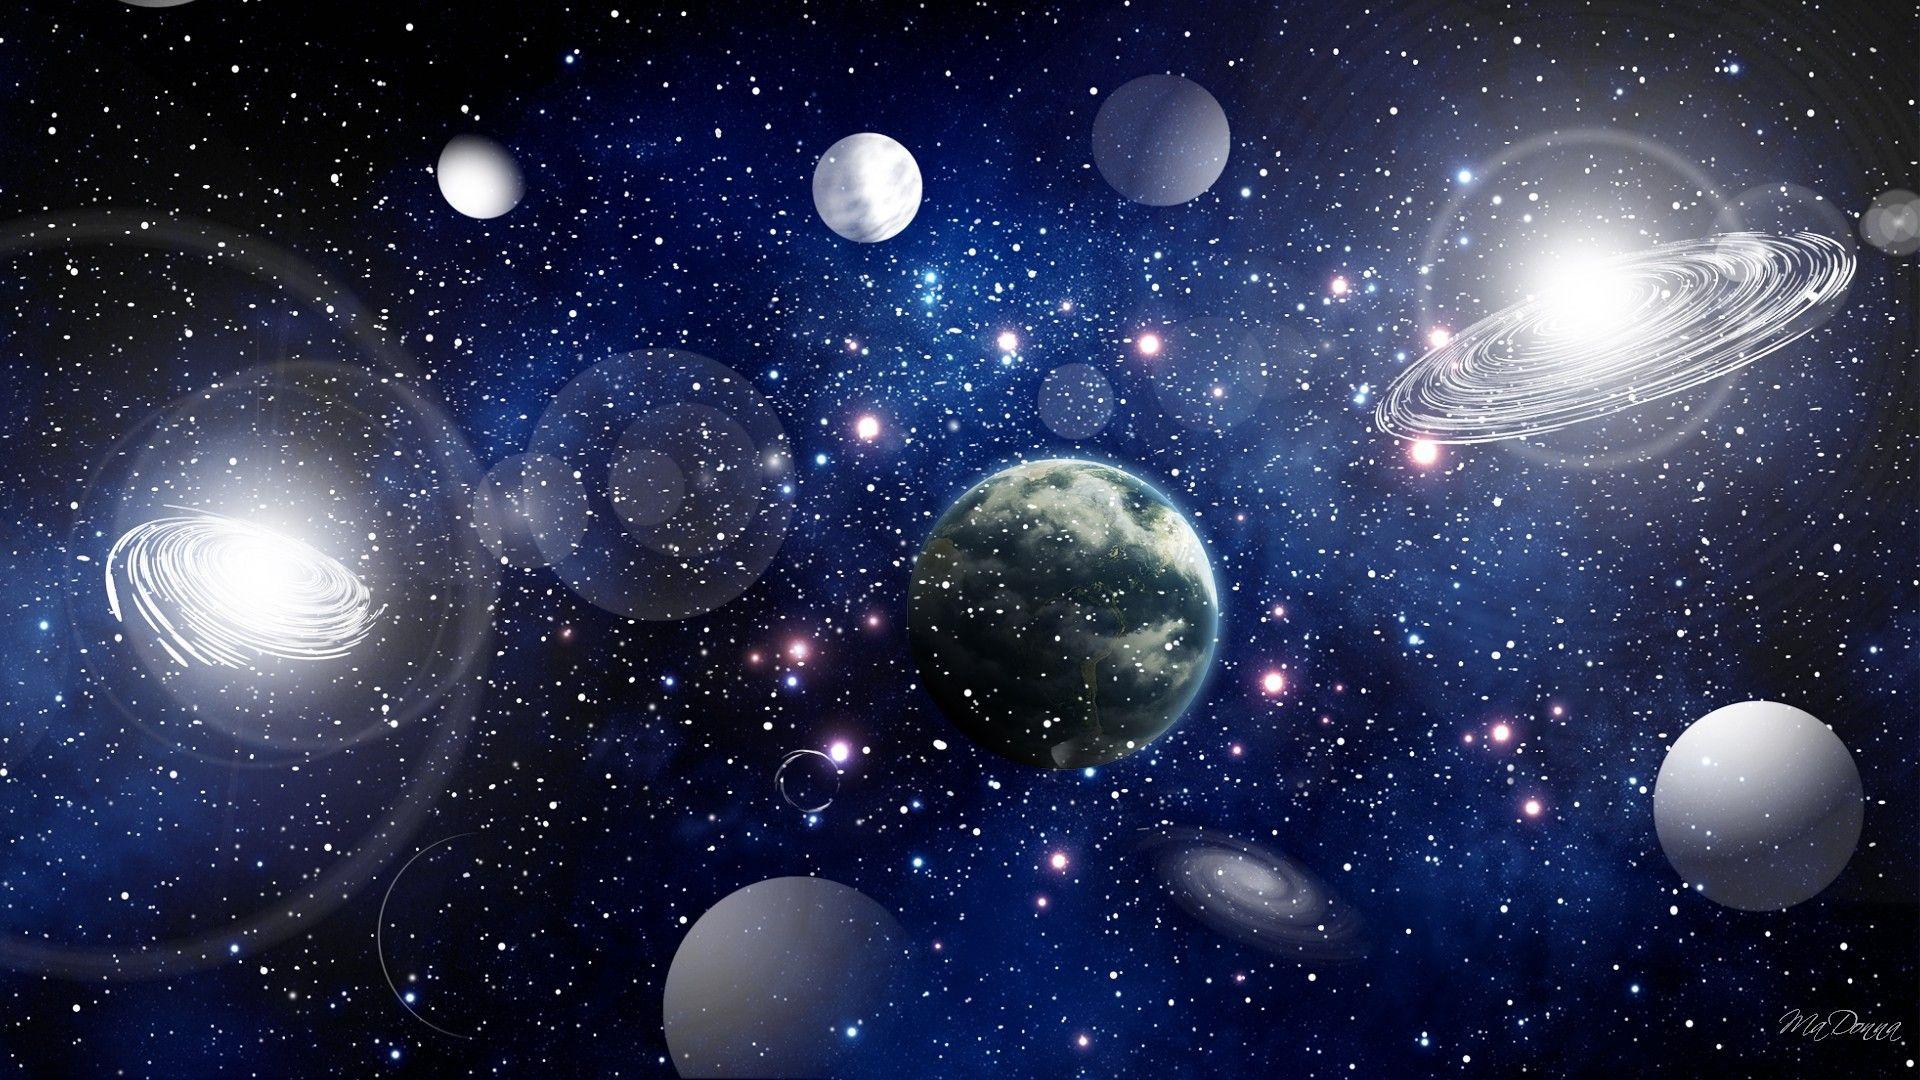  Universe  Full HD  PC  Wallpapers  Top Free Universe  Full HD  